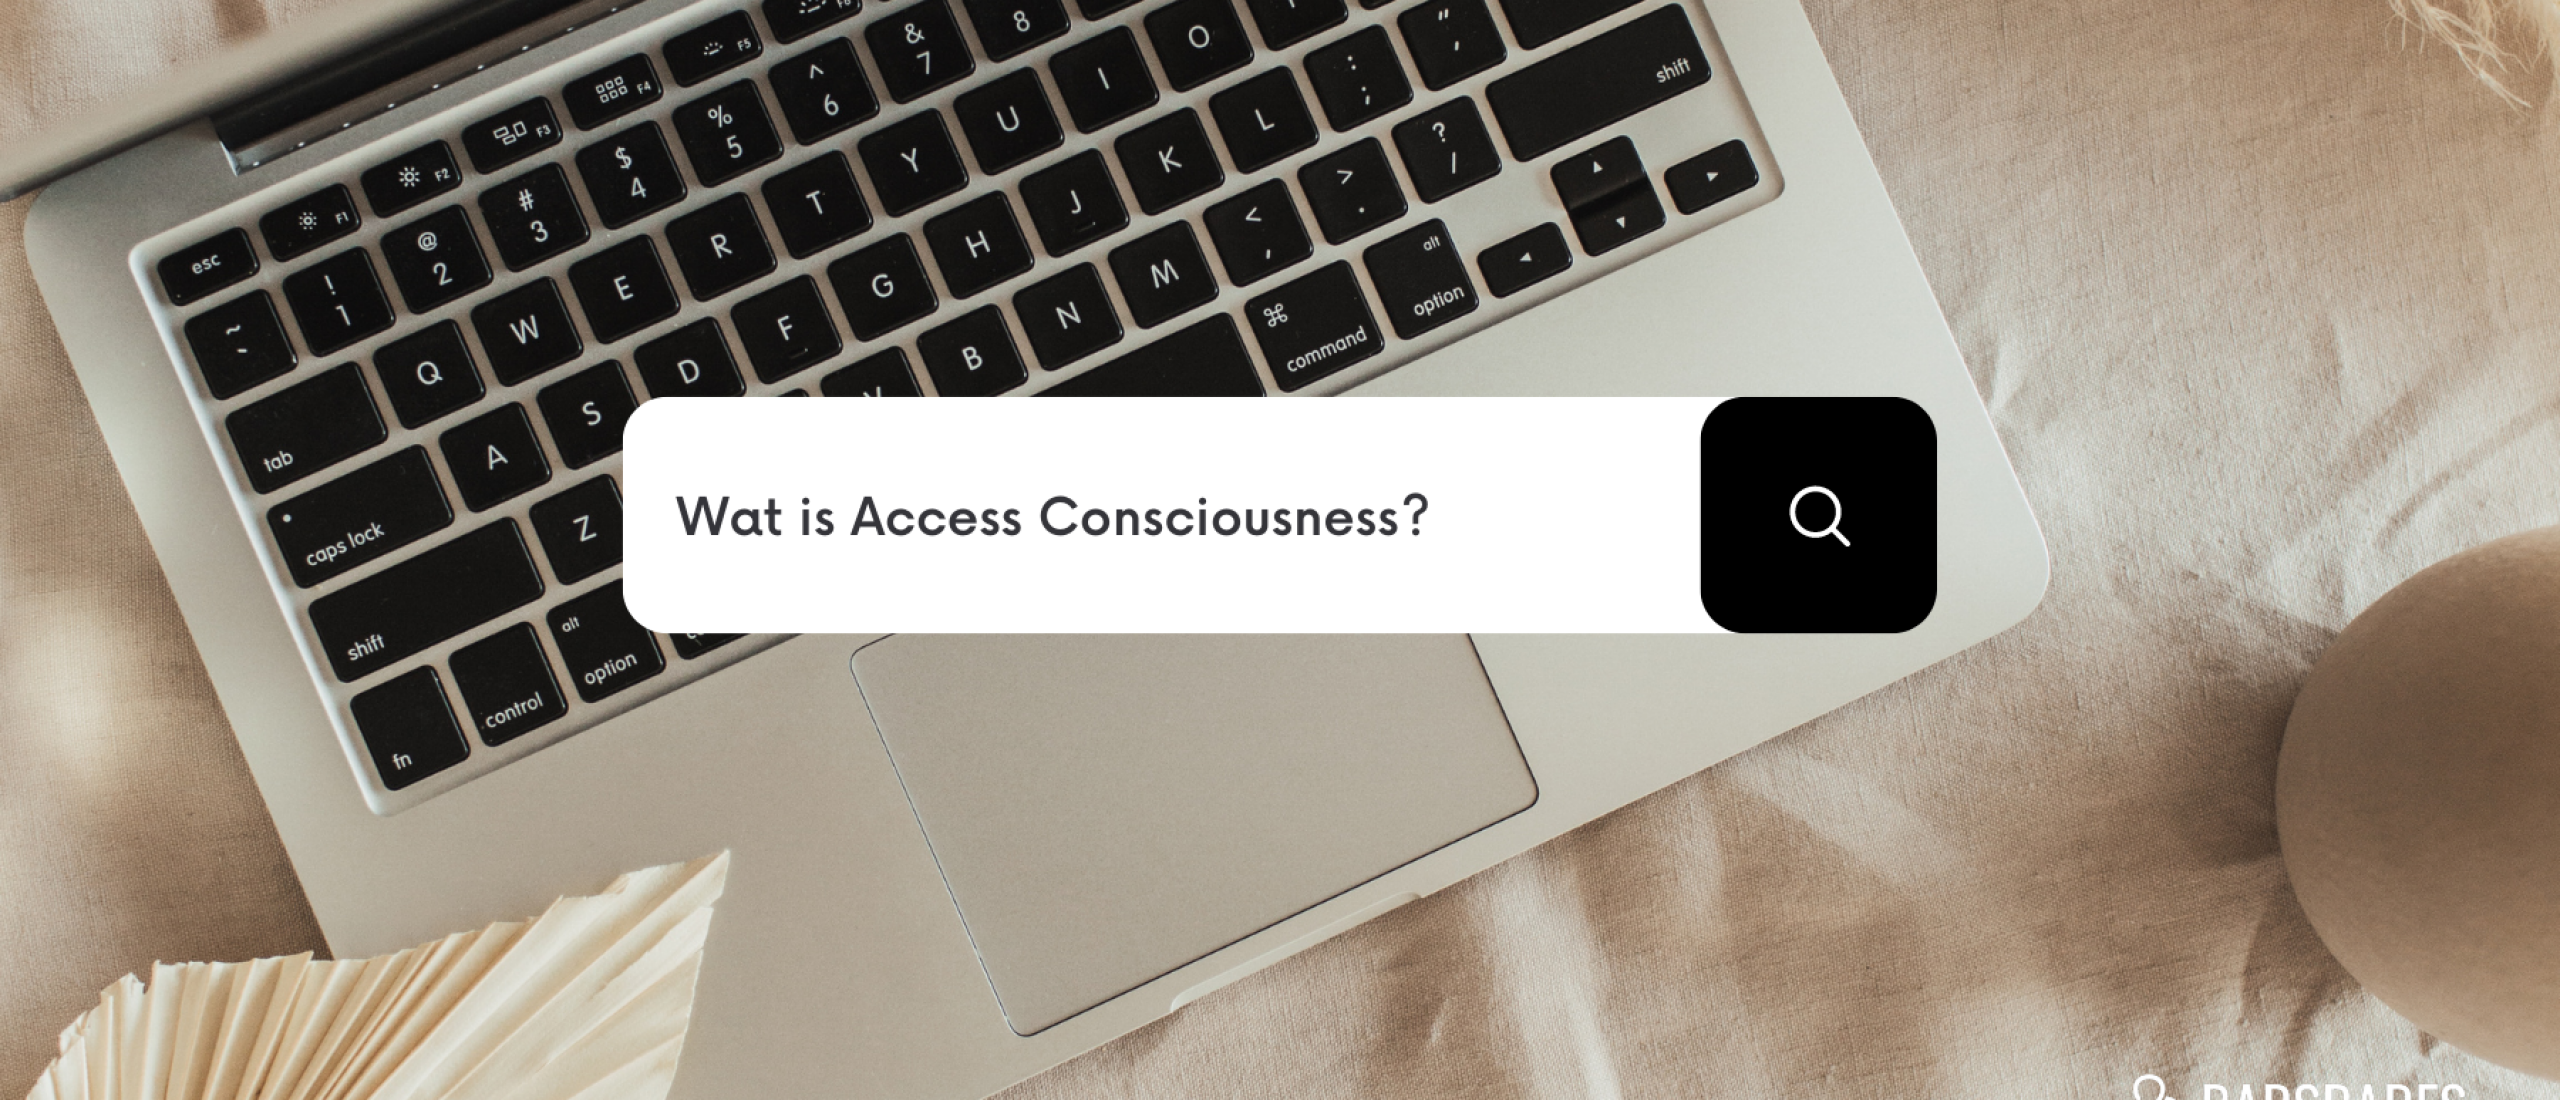 Wat is access consciousness?